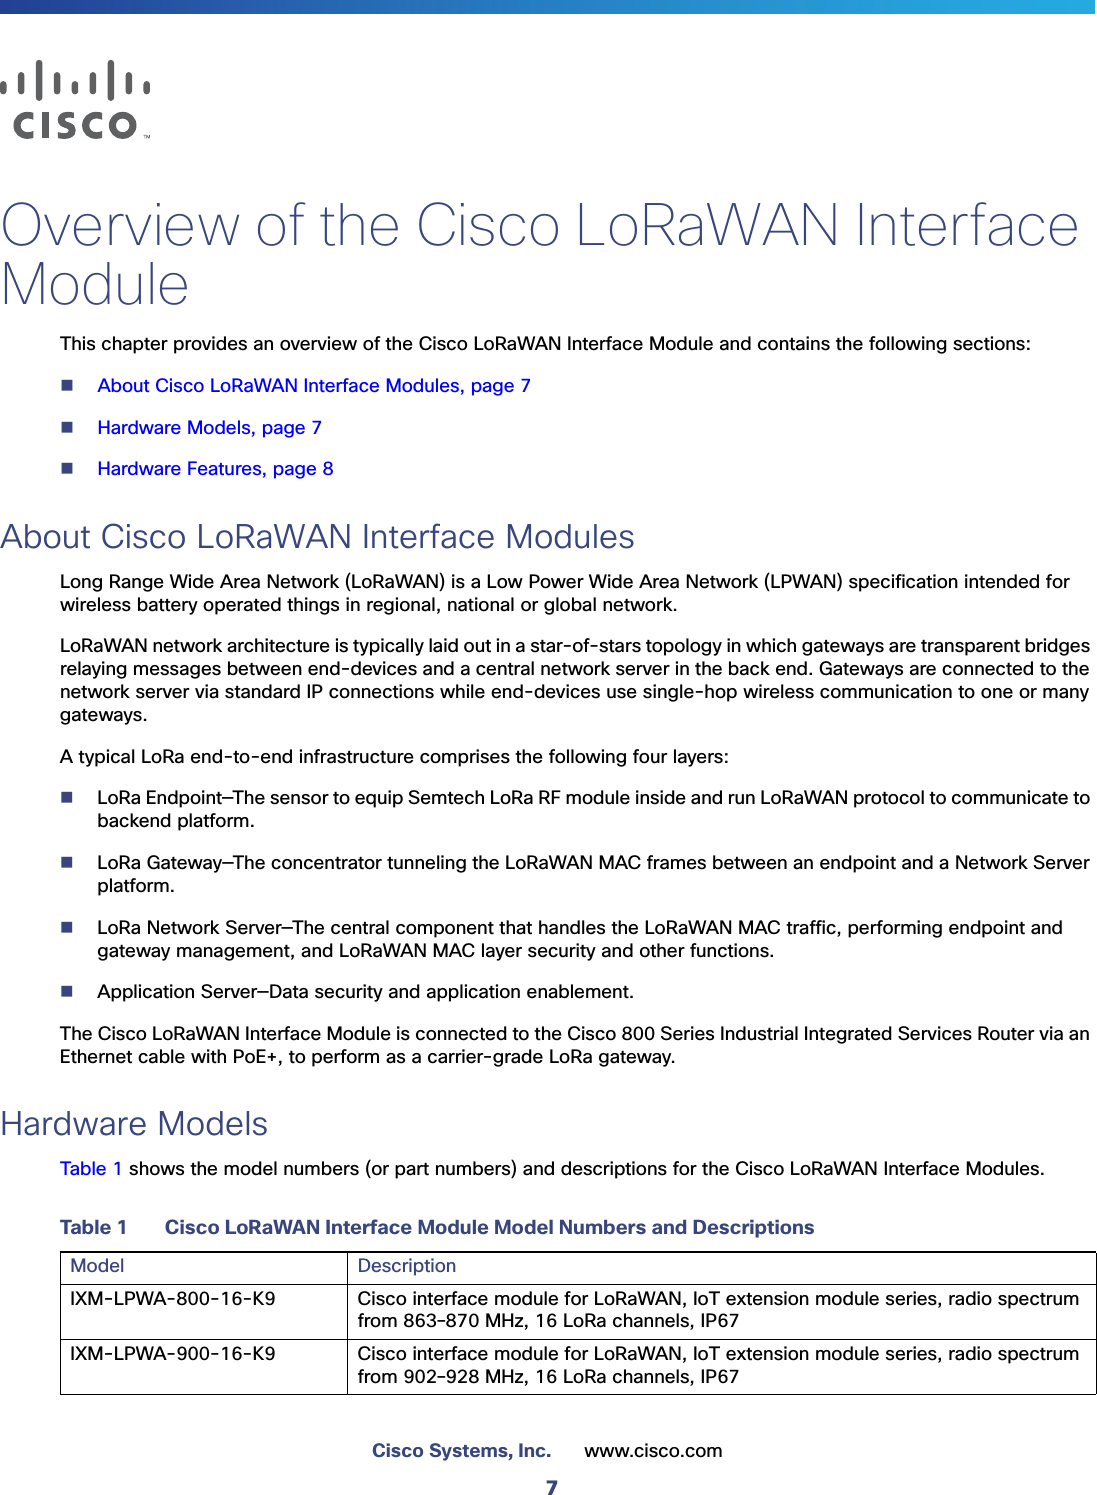 7Cisco Systems, Inc. www.cisco.com Overview of the Cisco LoRaWAN Interface ModuleThis chapter provides an overview of the Cisco LoRaWAN Interface Module and contains the following sections:About Cisco LoRaWAN Interface Modules, page 7Hardware Models, page 7Hardware Features, page 8About Cisco LoRaWAN Interface ModulesLong Range Wide Area Network (LoRaWAN) is a Low Power Wide Area Network (LPWAN) specification intended for wireless battery operated things in regional, national or global network.LoRaWAN network architecture is typically laid out in a star-of-stars topology in which gateways are transparent bridges relaying messages between end-devices and a central network server in the back end. Gateways are connected to the network server via standard IP connections while end-devices use single-hop wireless communication to one or many gateways. A typical LoRa end-to-end infrastructure comprises the following four layers:LoRa Endpoint—The sensor to equip Semtech LoRa RF module inside and run LoRaWAN protocol to communicate to backend platform.LoRa Gateway—The concentrator tunneling the LoRaWAN MAC frames between an endpoint and a Network Server platform.LoRa Network Server—The central component that handles the LoRaWAN MAC traffic, performing endpoint and gateway management, and LoRaWAN MAC layer security and other functions.Application Server—Data security and application enablement.The Cisco LoRaWAN Interface Module is connected to the Cisco 800 Series Industrial Integrated Services Router via an Ethernet cable with PoE+, to perform as a carrier-grade LoRa gateway.Hardware ModelsTable 1 shows the model numbers (or part numbers) and descriptions for the Cisco LoRaWAN Interface Modules.Table 1 Cisco LoRaWAN Interface Module Model Numbers and DescriptionsModel DescriptionIXM-LPWA-800-16-K9 Cisco interface module for LoRaWAN, IoT extension module series, radio spectrum from 863–870 MHz, 16 LoRa channels, IP67IXM-LPWA-900-16-K9 Cisco interface module for LoRaWAN, IoT extension module series, radio spectrum from 902–928 MHz, 16 LoRa channels, IP67